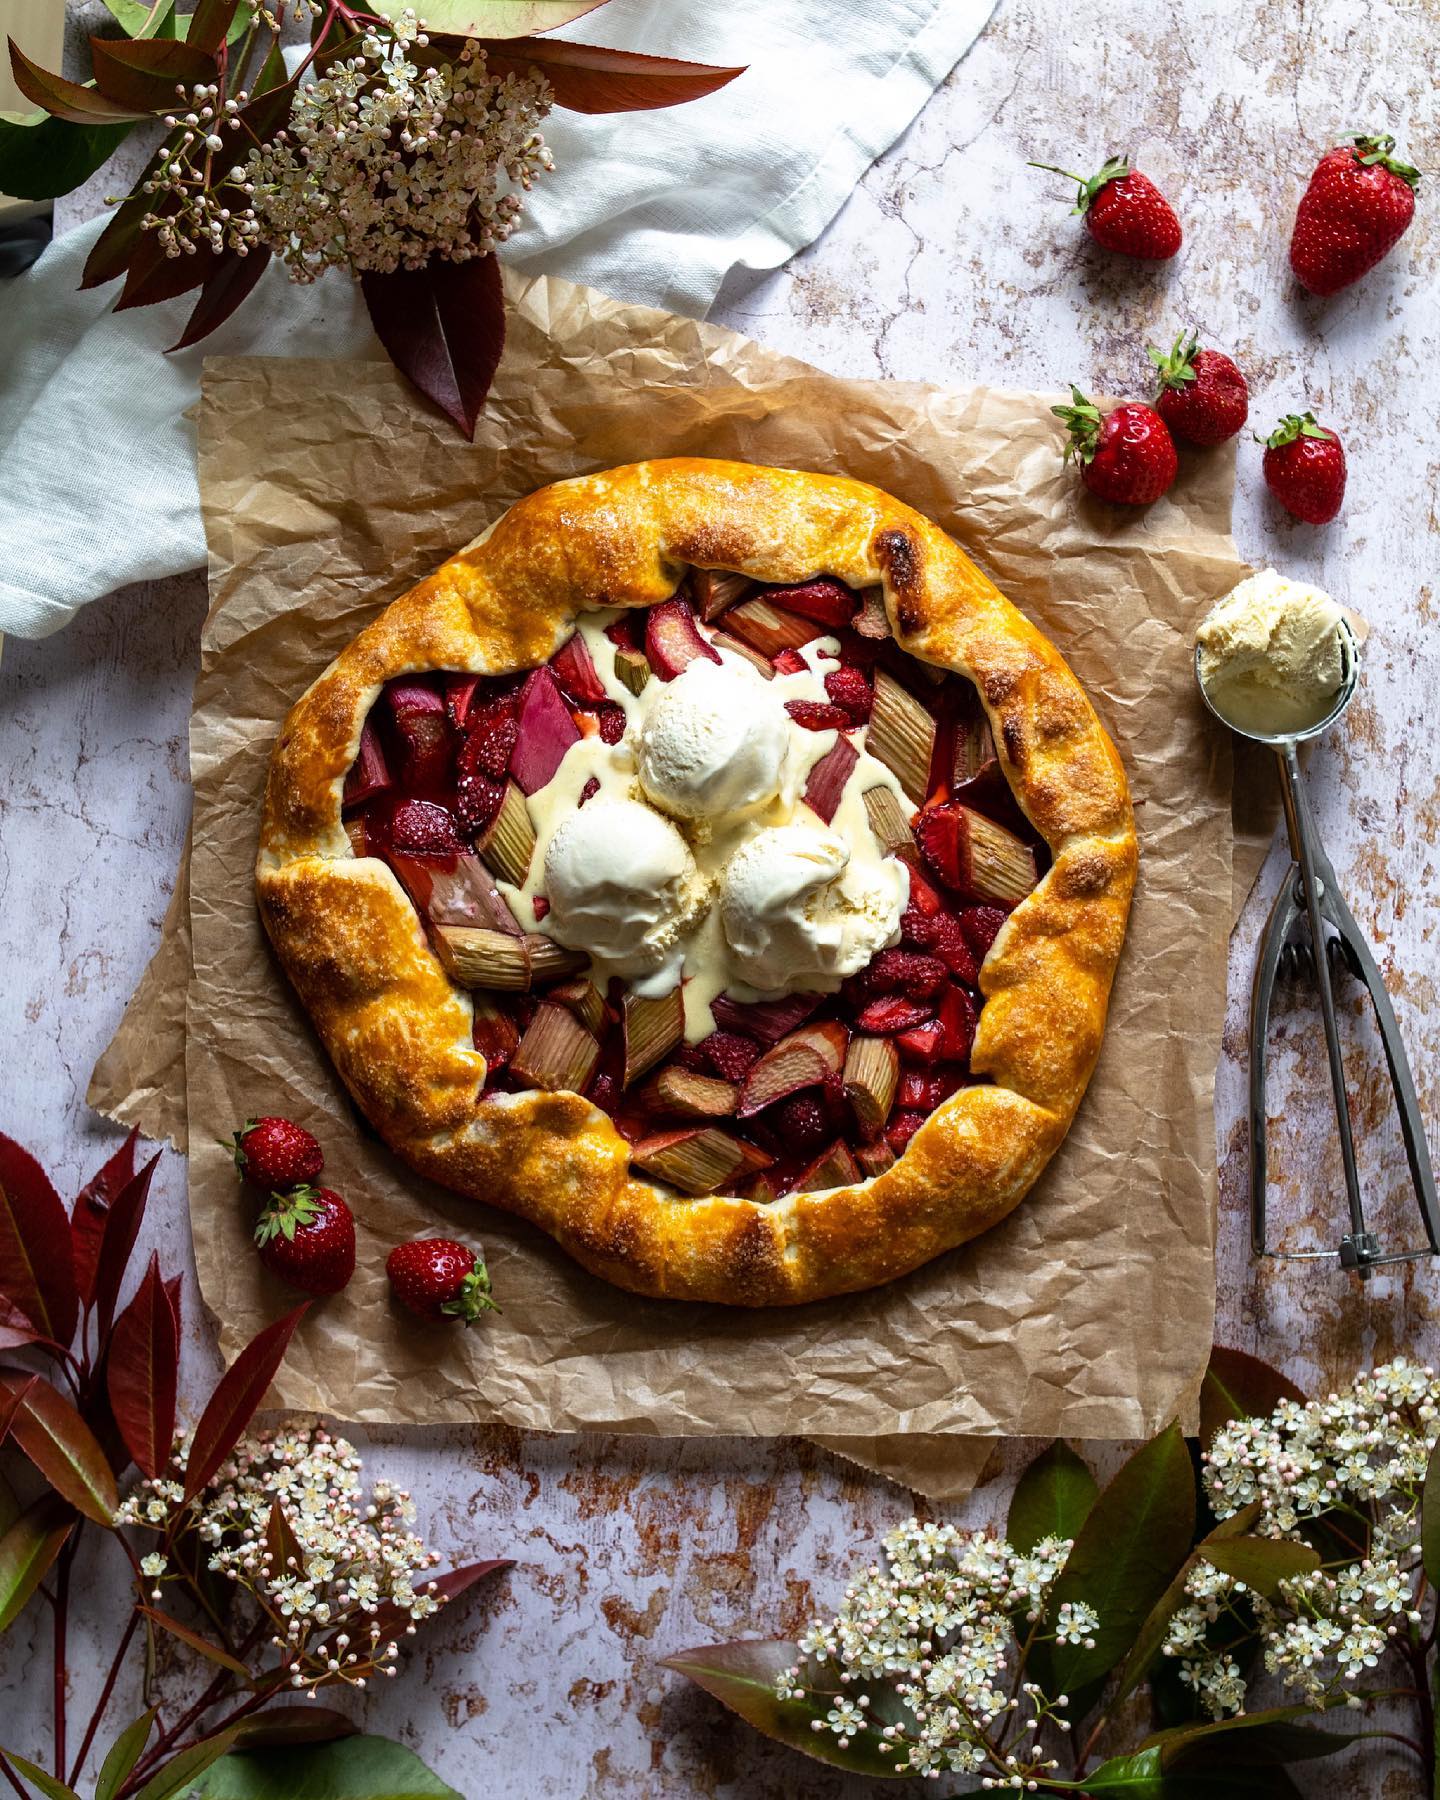 ✨ new recipe ✨ rhubarb strawberry galette 

Rhubarb season is coming to an end and if you want to make one last recipe with it, I highly recommend to make this rhubarb strawberry galette! It’s a crispy, flaky galette with this amazing filling that combines the tart rhubarb with the sweetness of the strawberries 🍓 vanilla ice on top isn’t obligatory, but highly recommended! 😊

Find the recipe on anniundhilde.de (English version below German recipe, just scroll down). Link in bio! ✨

#backenmitliebe #backenmachtglücklich #backenmachtspass #backenmachtfreude #freshbaked #bakefromscratch #bakersofinstagram #foodphotography #foodstyling #foodblogger #foodblogger_de #foodphoto #foodshot #feedfeed #feedfeedbaking #thebakefeed #foodblogfeed #foodtographyschool #foodfluffer #tohfoodie #foodartblog #hezzahezfood #foodartblogs #foody365 #cuisine_creations #beautifulcuisines #foodblogliebe #flatlaytoday #stilllifephotography #storyofmytable